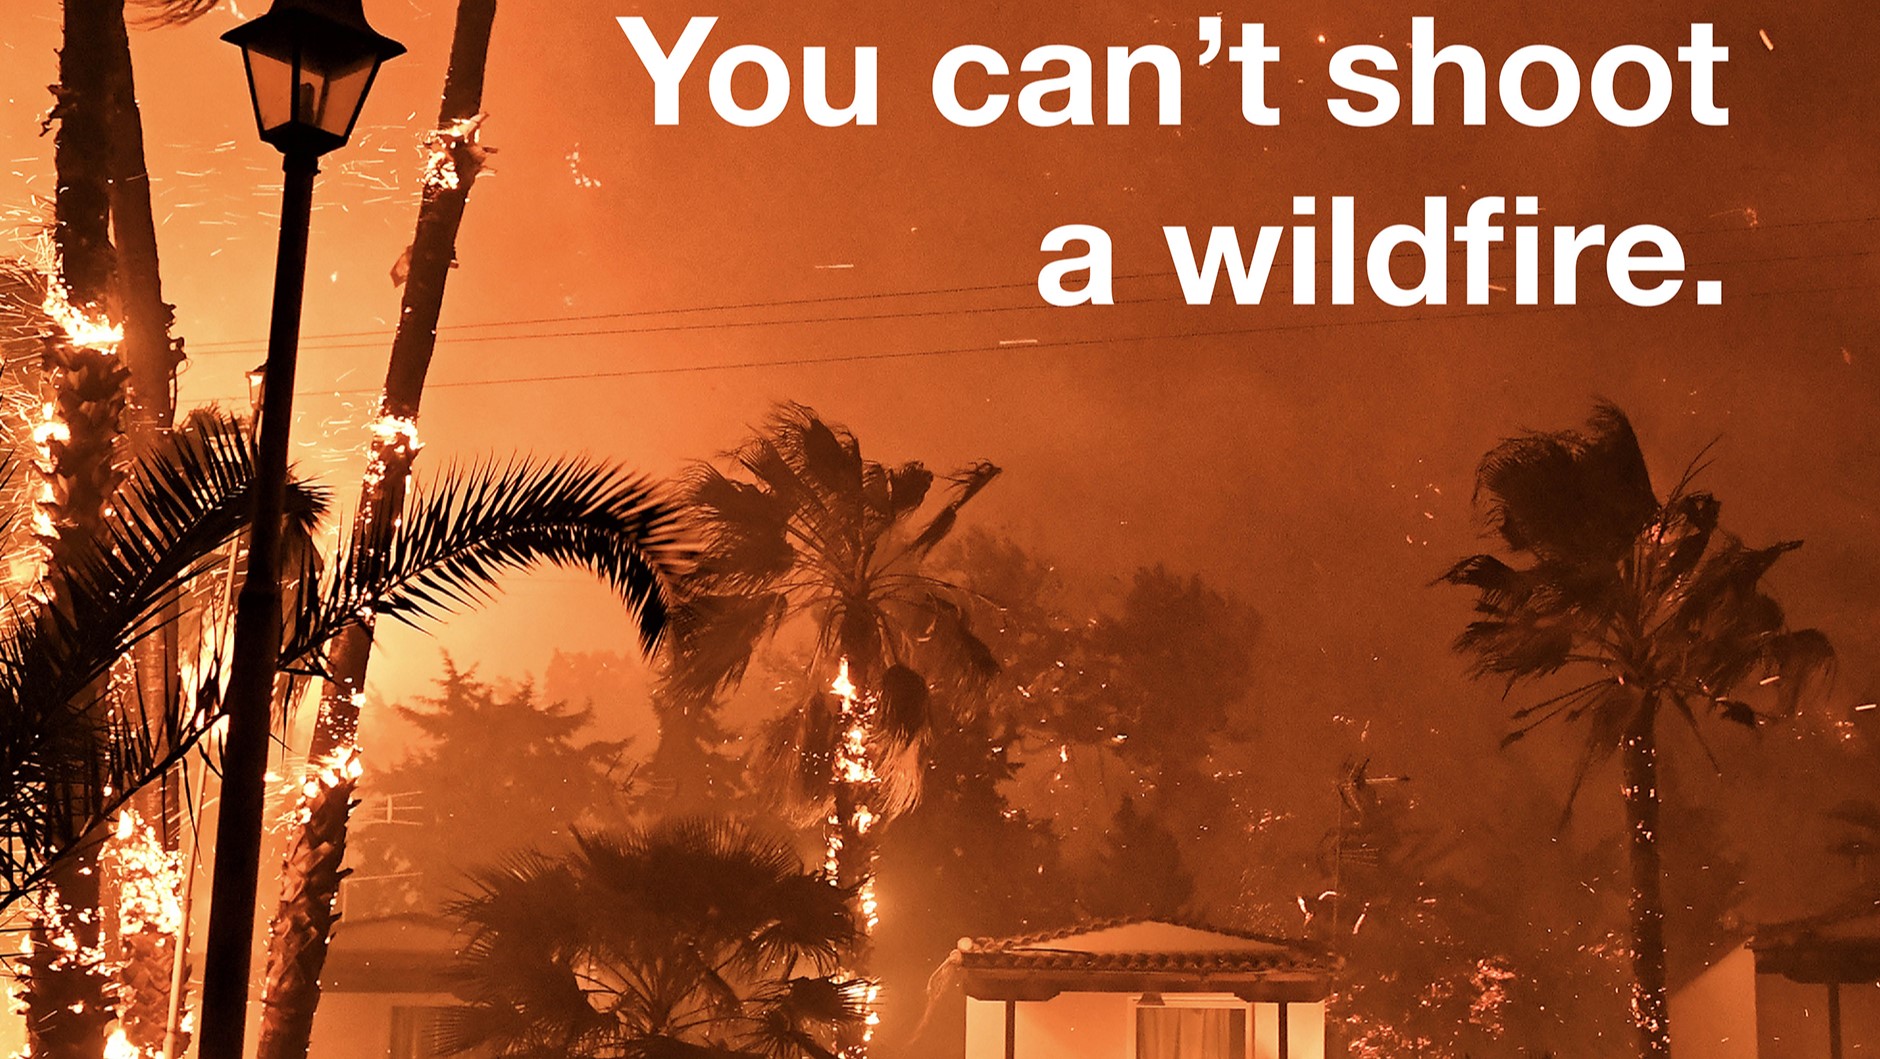 A tank faces a blazing wildfire with the caption: "you can't shoot a wildfire."